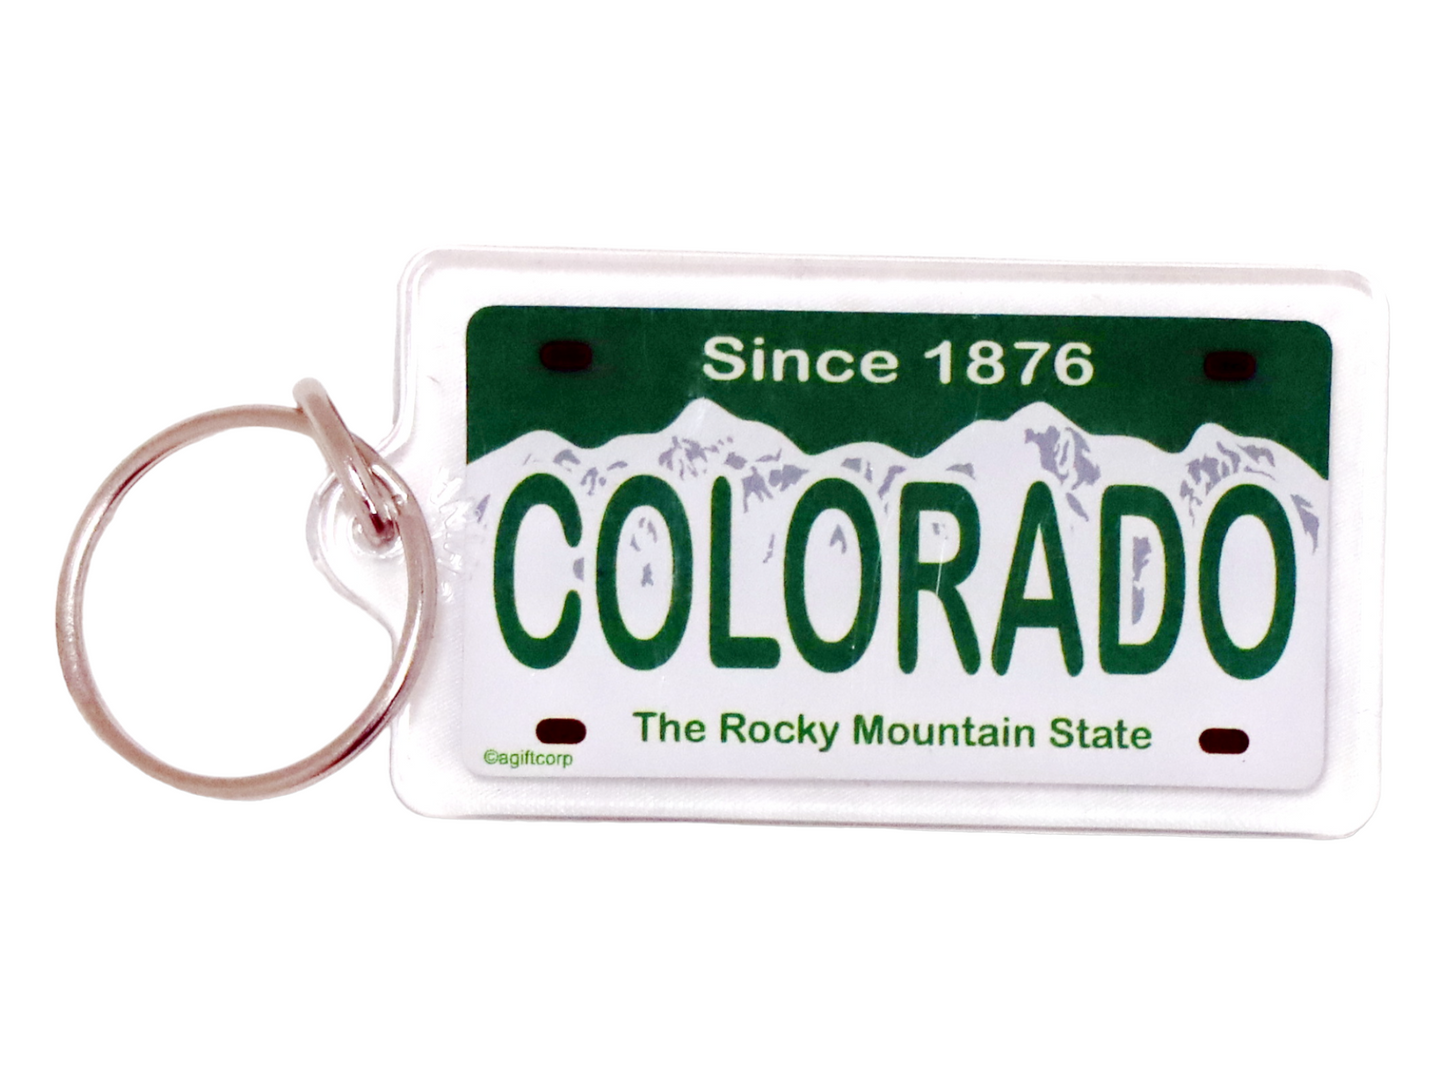 Colorado State License Plate Acrylic Rectangular Souvenir Keychain 2.5 inches X 1.5 inches